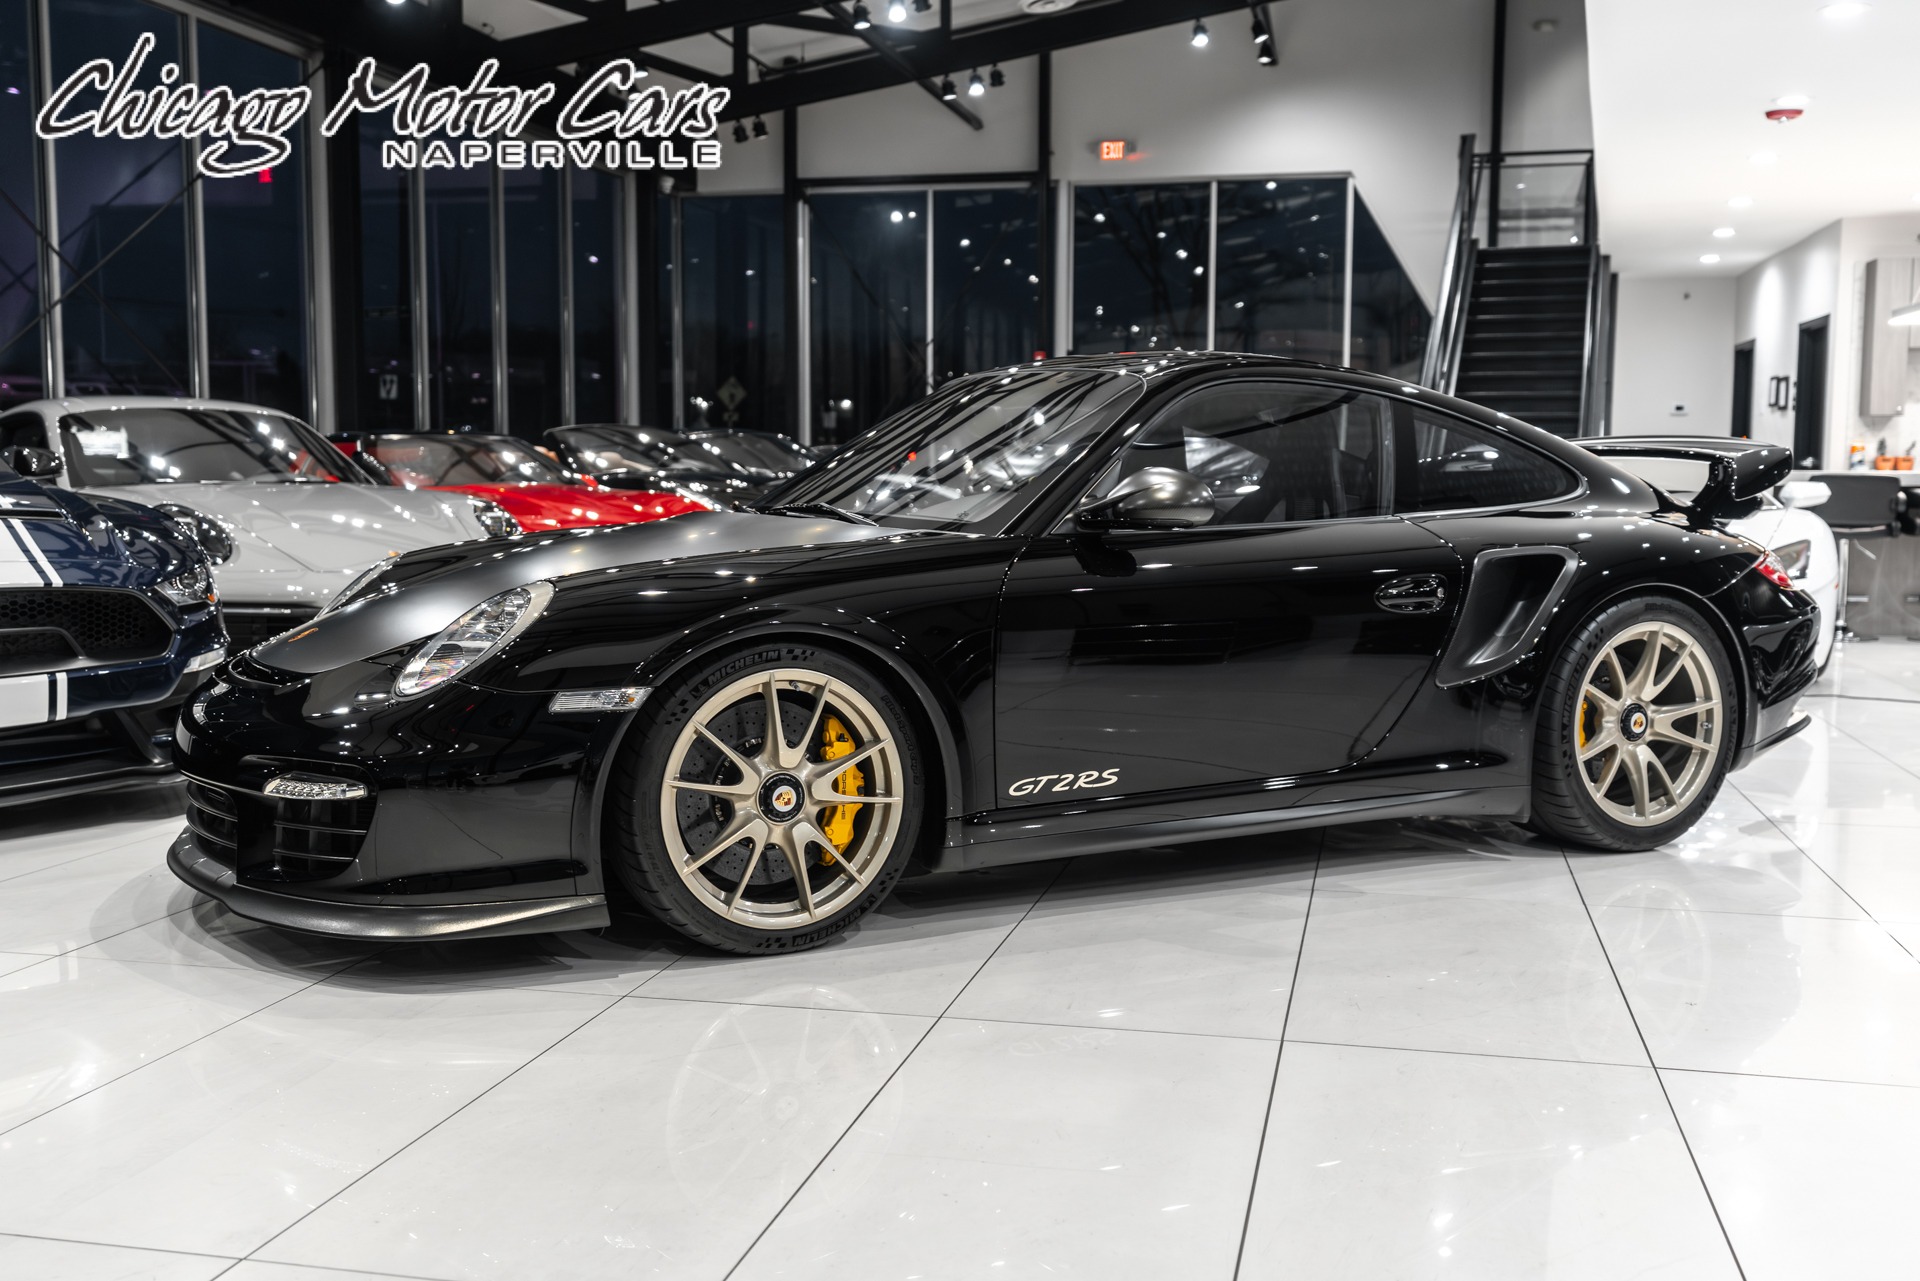 Used 2011 Porsche 911 GT2 RS Coupe 1 of ONLY 500 EVER MADE 